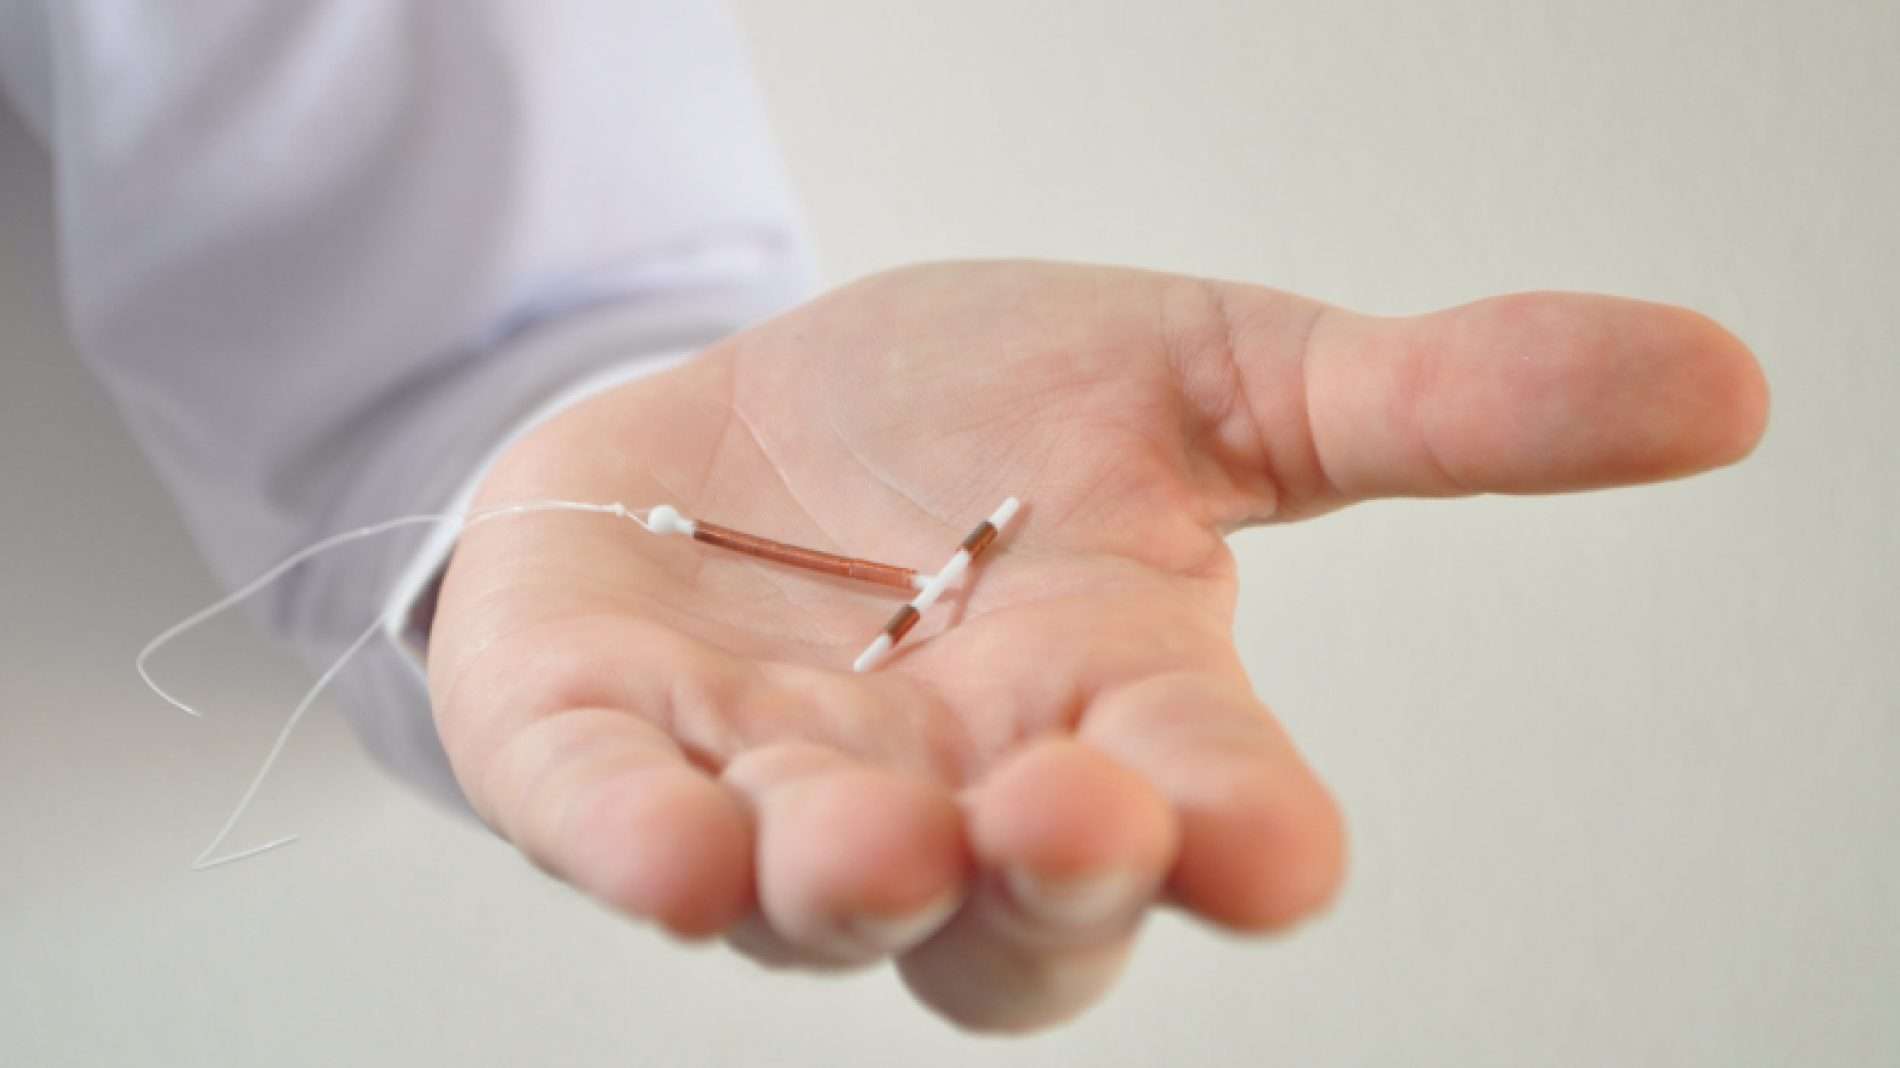 The coil: What is the difference between an IUD and an IUS ...